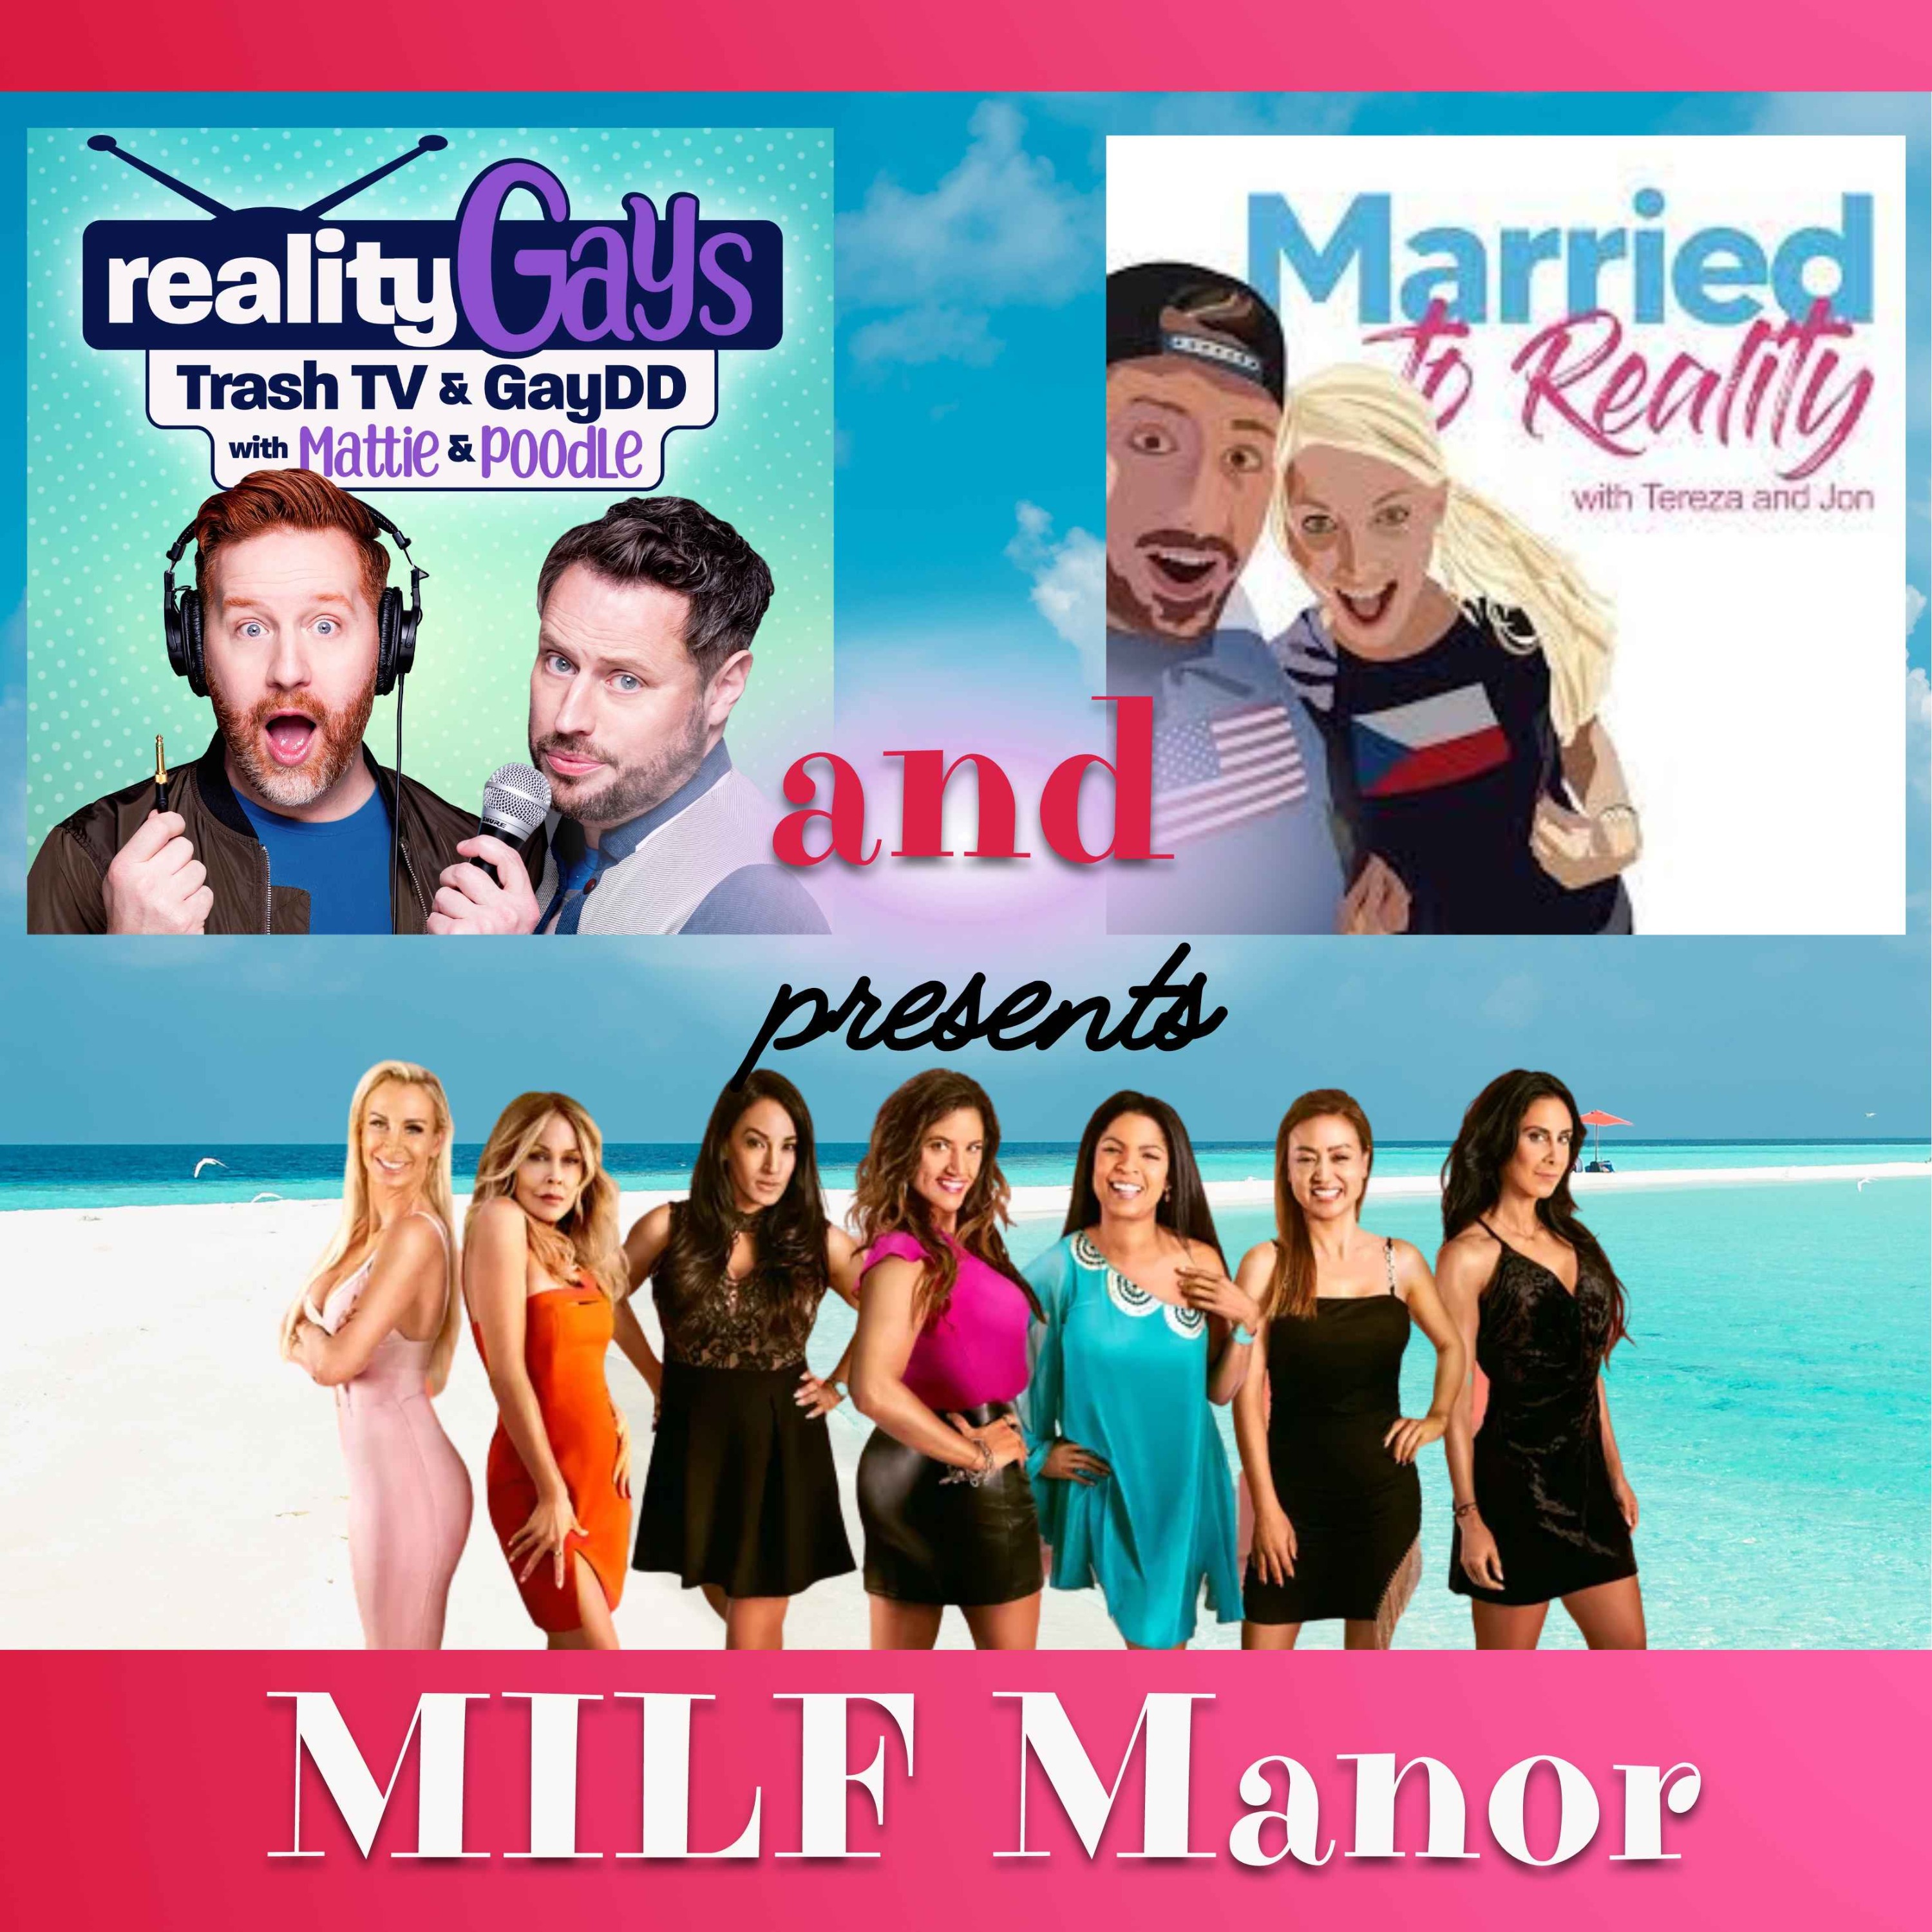 Reality Gays: Trash TV and GayDD with Mattie and Poodle - MILF MANOR: Collab with John and Tereza from MARRIED TO REALITY Podcast